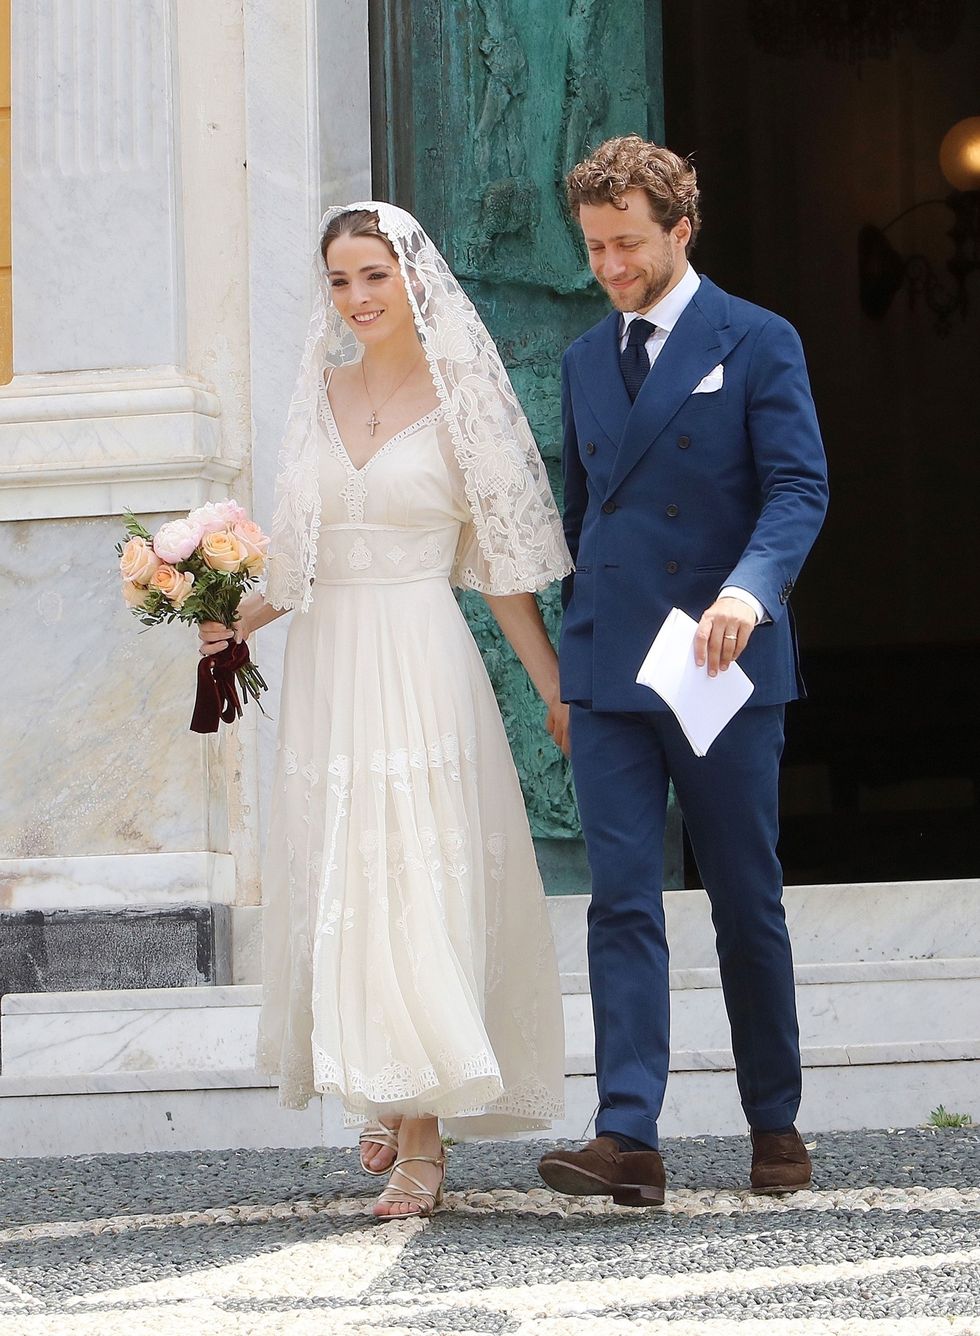 Bee Shaffer's Italian wedding dress is as stylish as you would expect – See  Bee Shaffer's second wedding dress